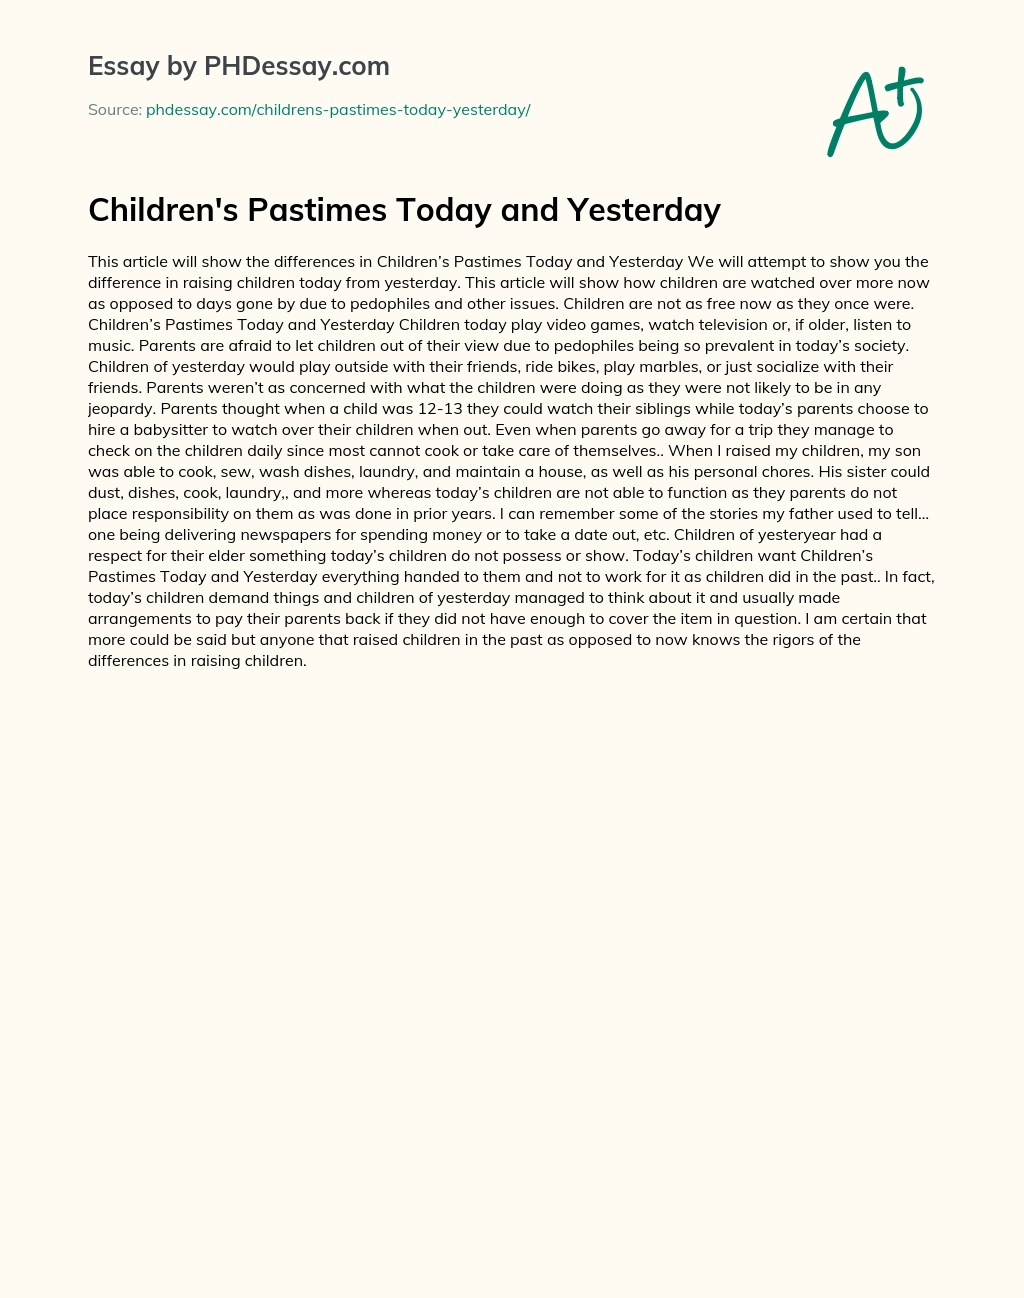 Children’s Pastimes Today and Yesterday essay